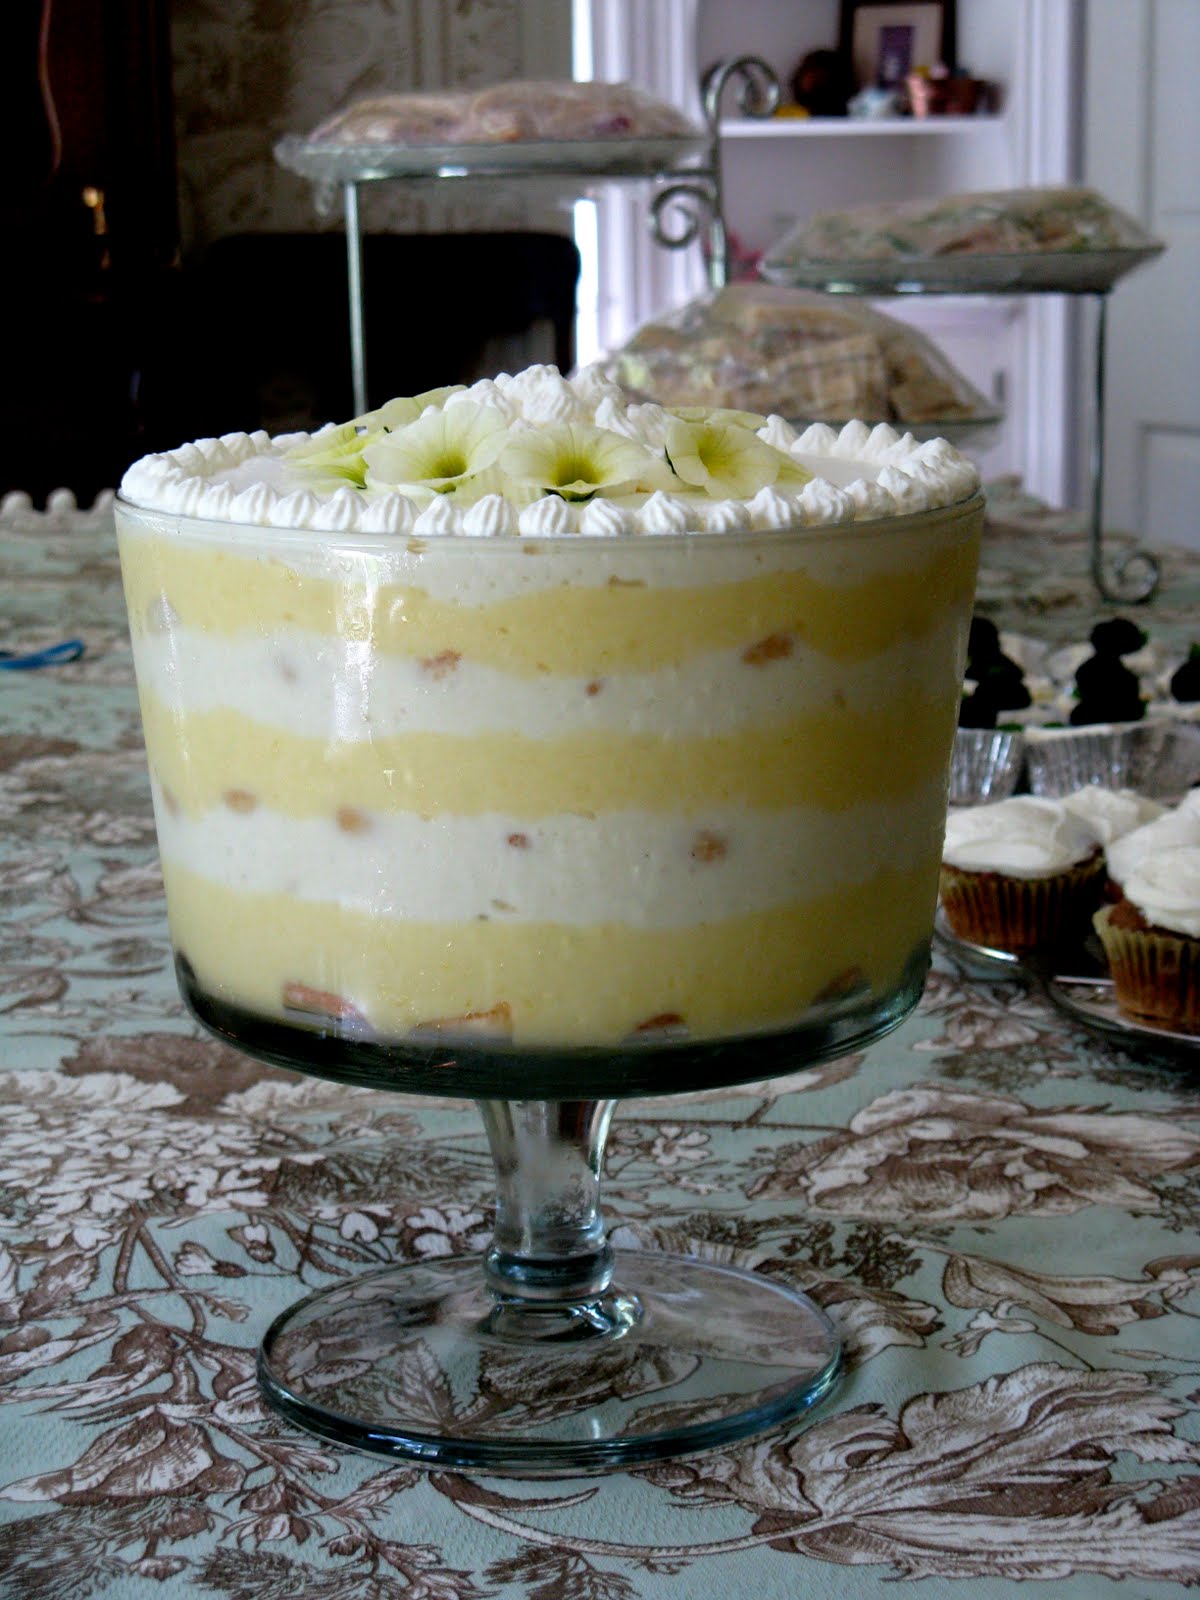 The Cilantropist: An Afternoon Bridal Shower: Lemon Berry White Chocolate Trifle1200 x 1600